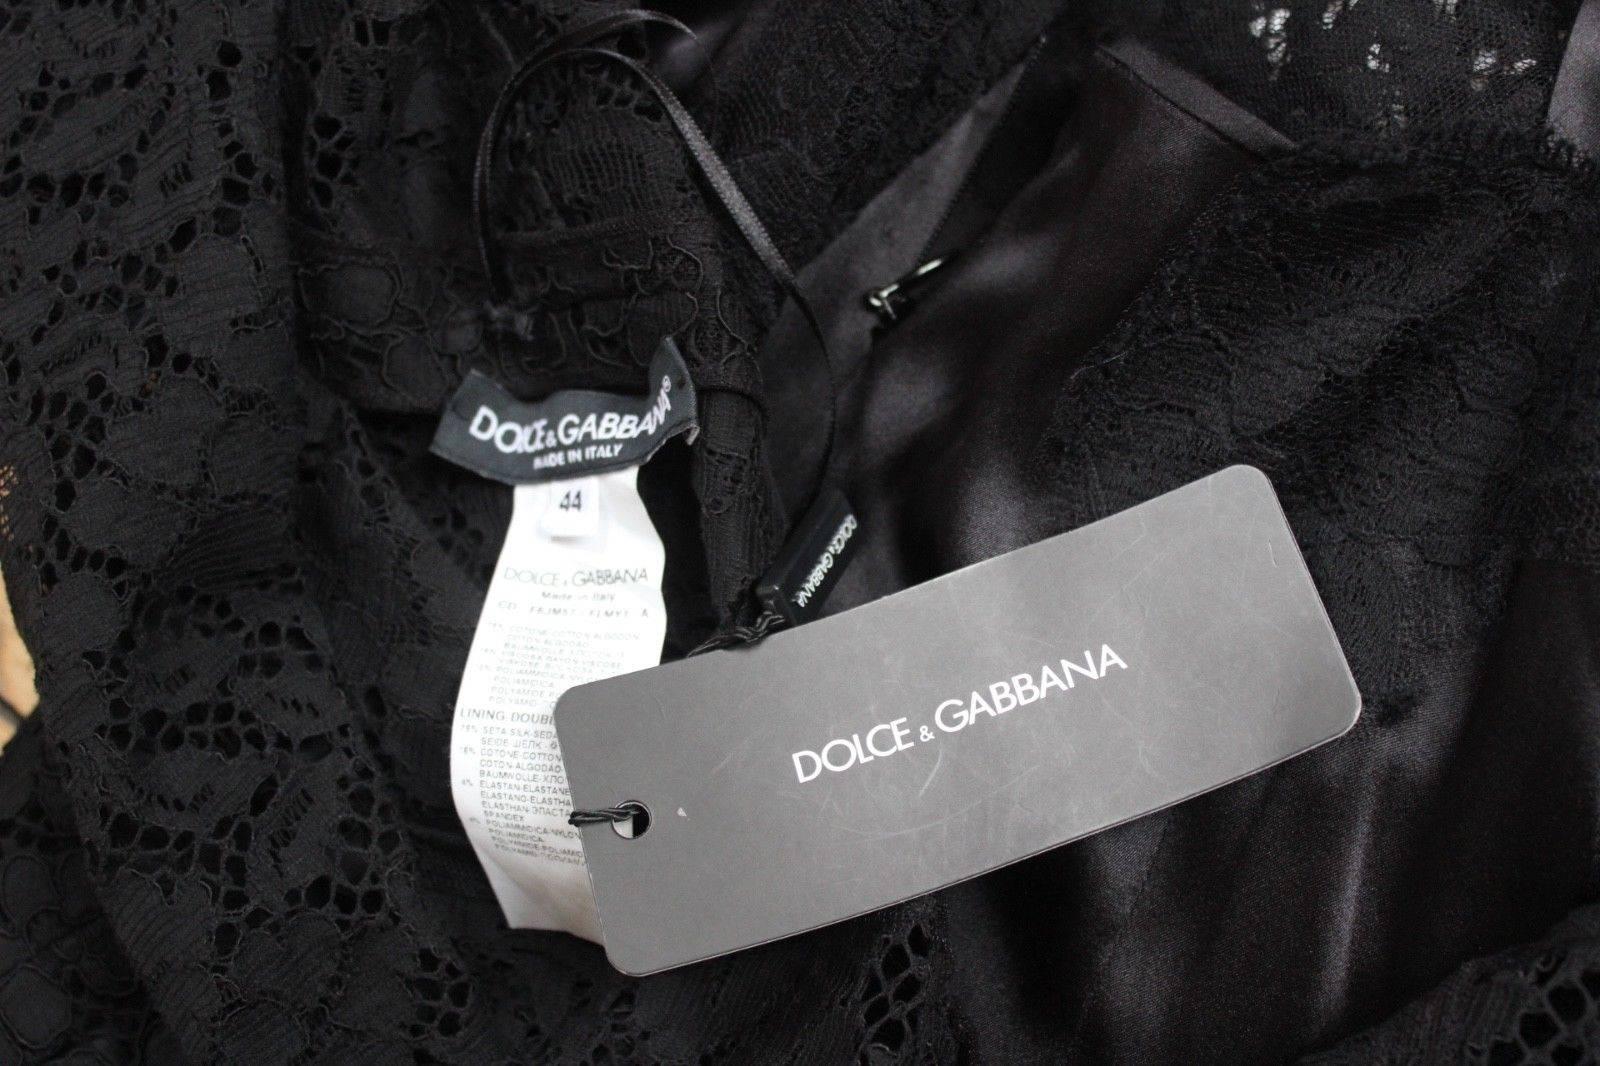 New £1983 Dolce and Gabbana Black Lace Overlay Dress Italian 44 uk 12 For Sale 2